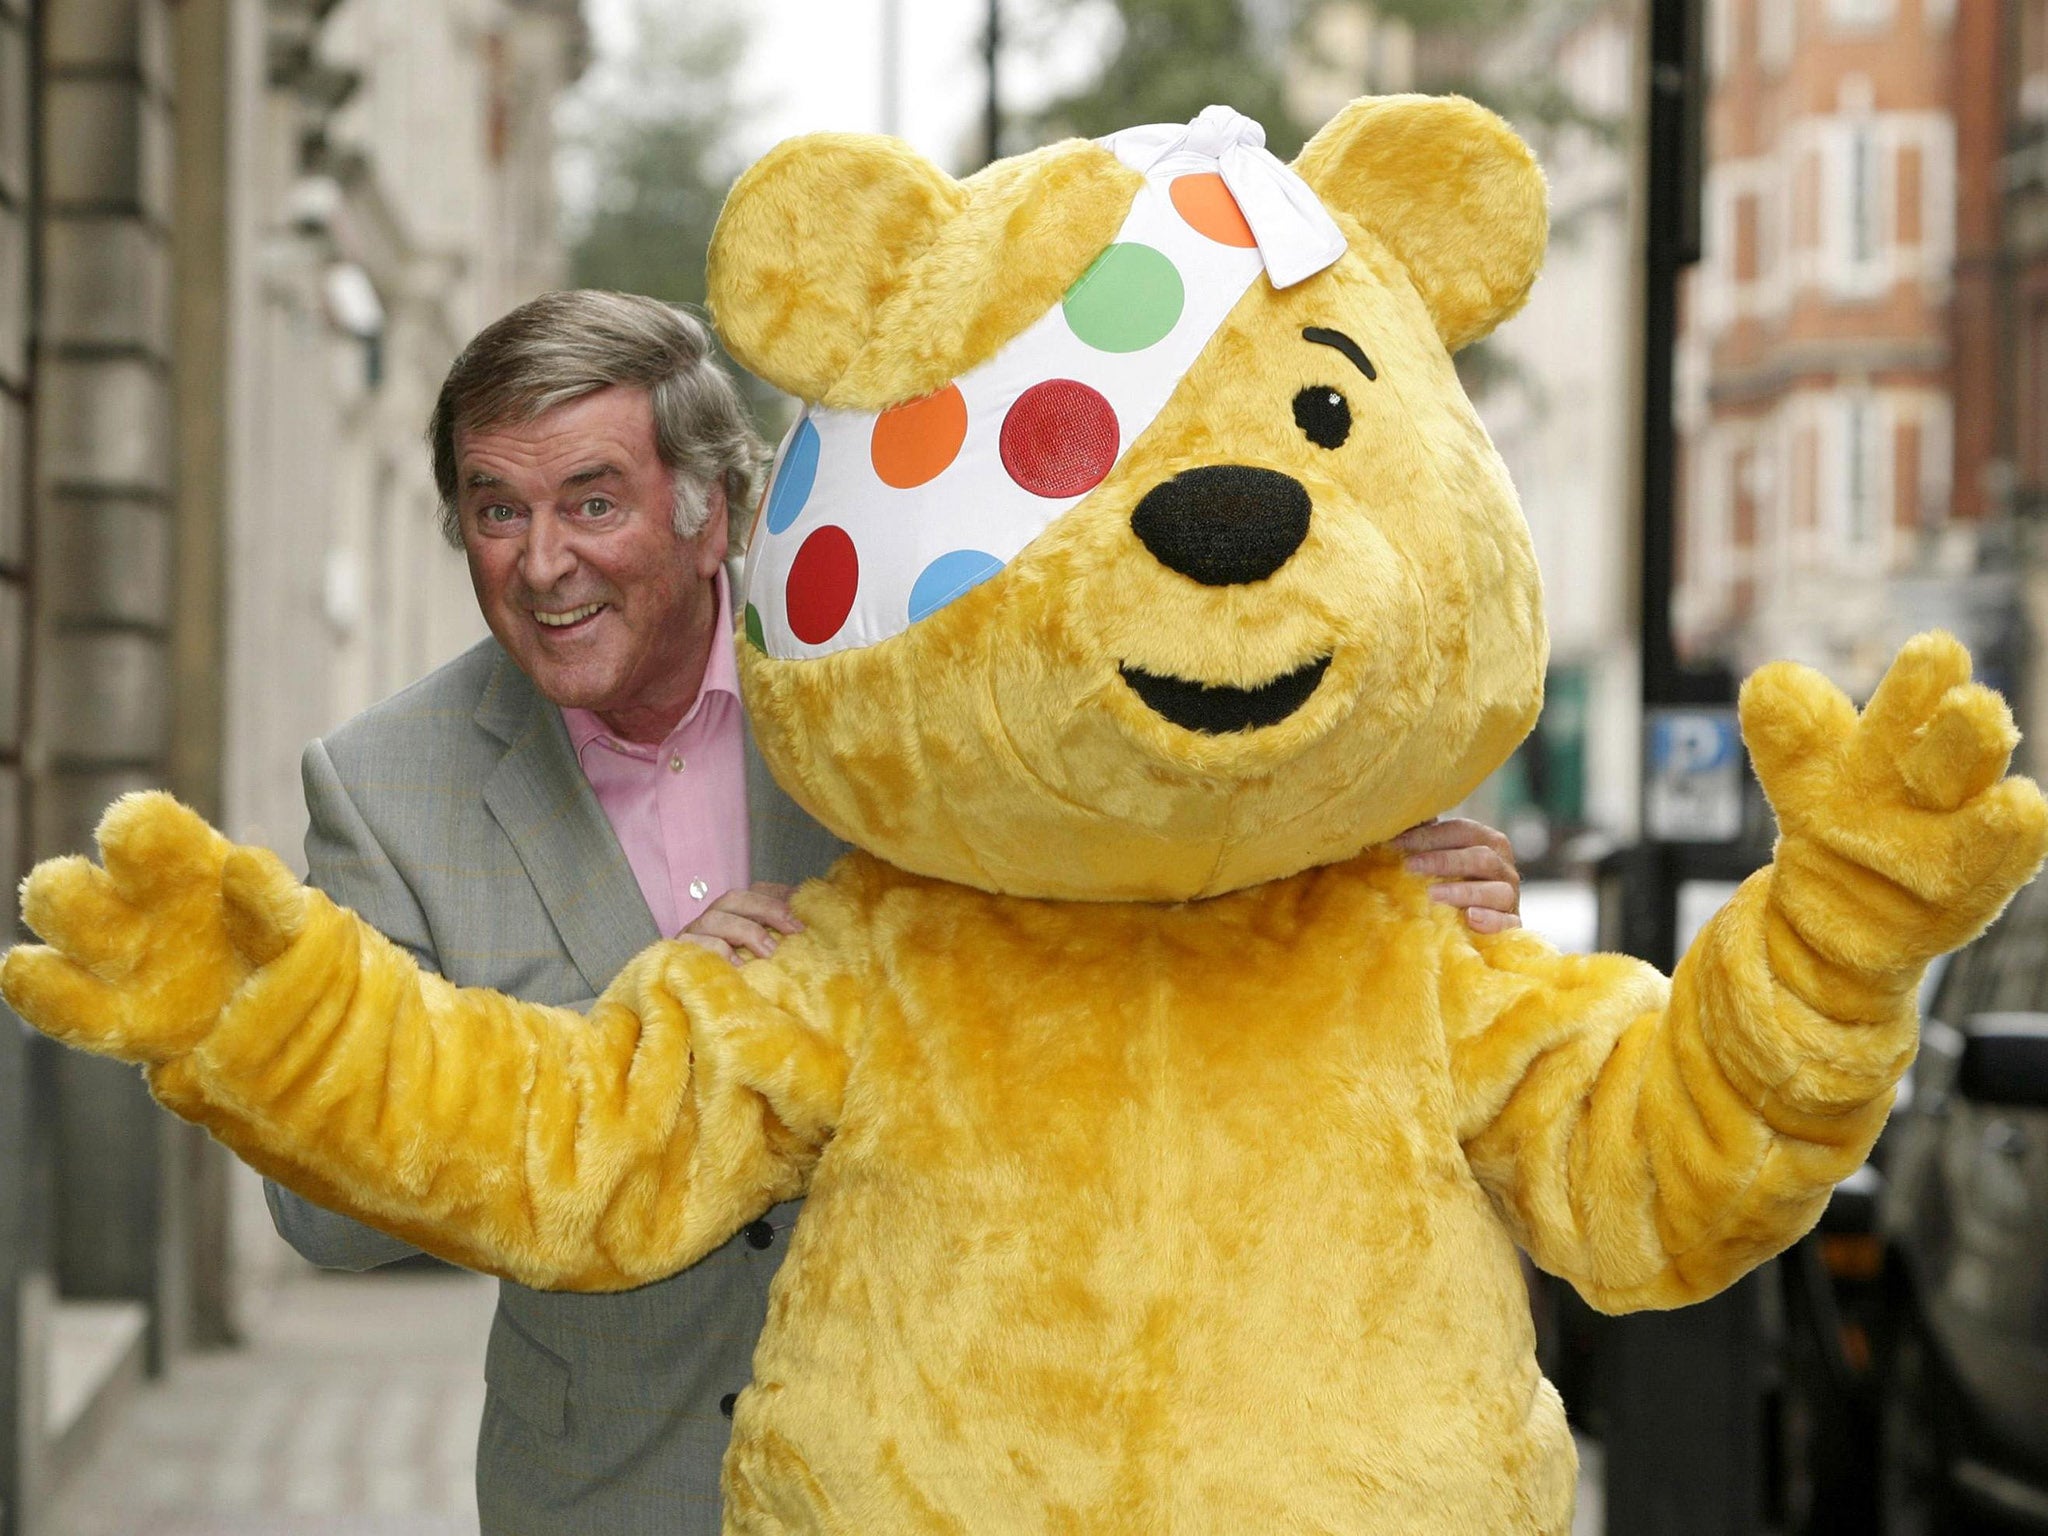 Terry Wogan hosted the BBC's annual Children in Need every year from 1980 to 2015